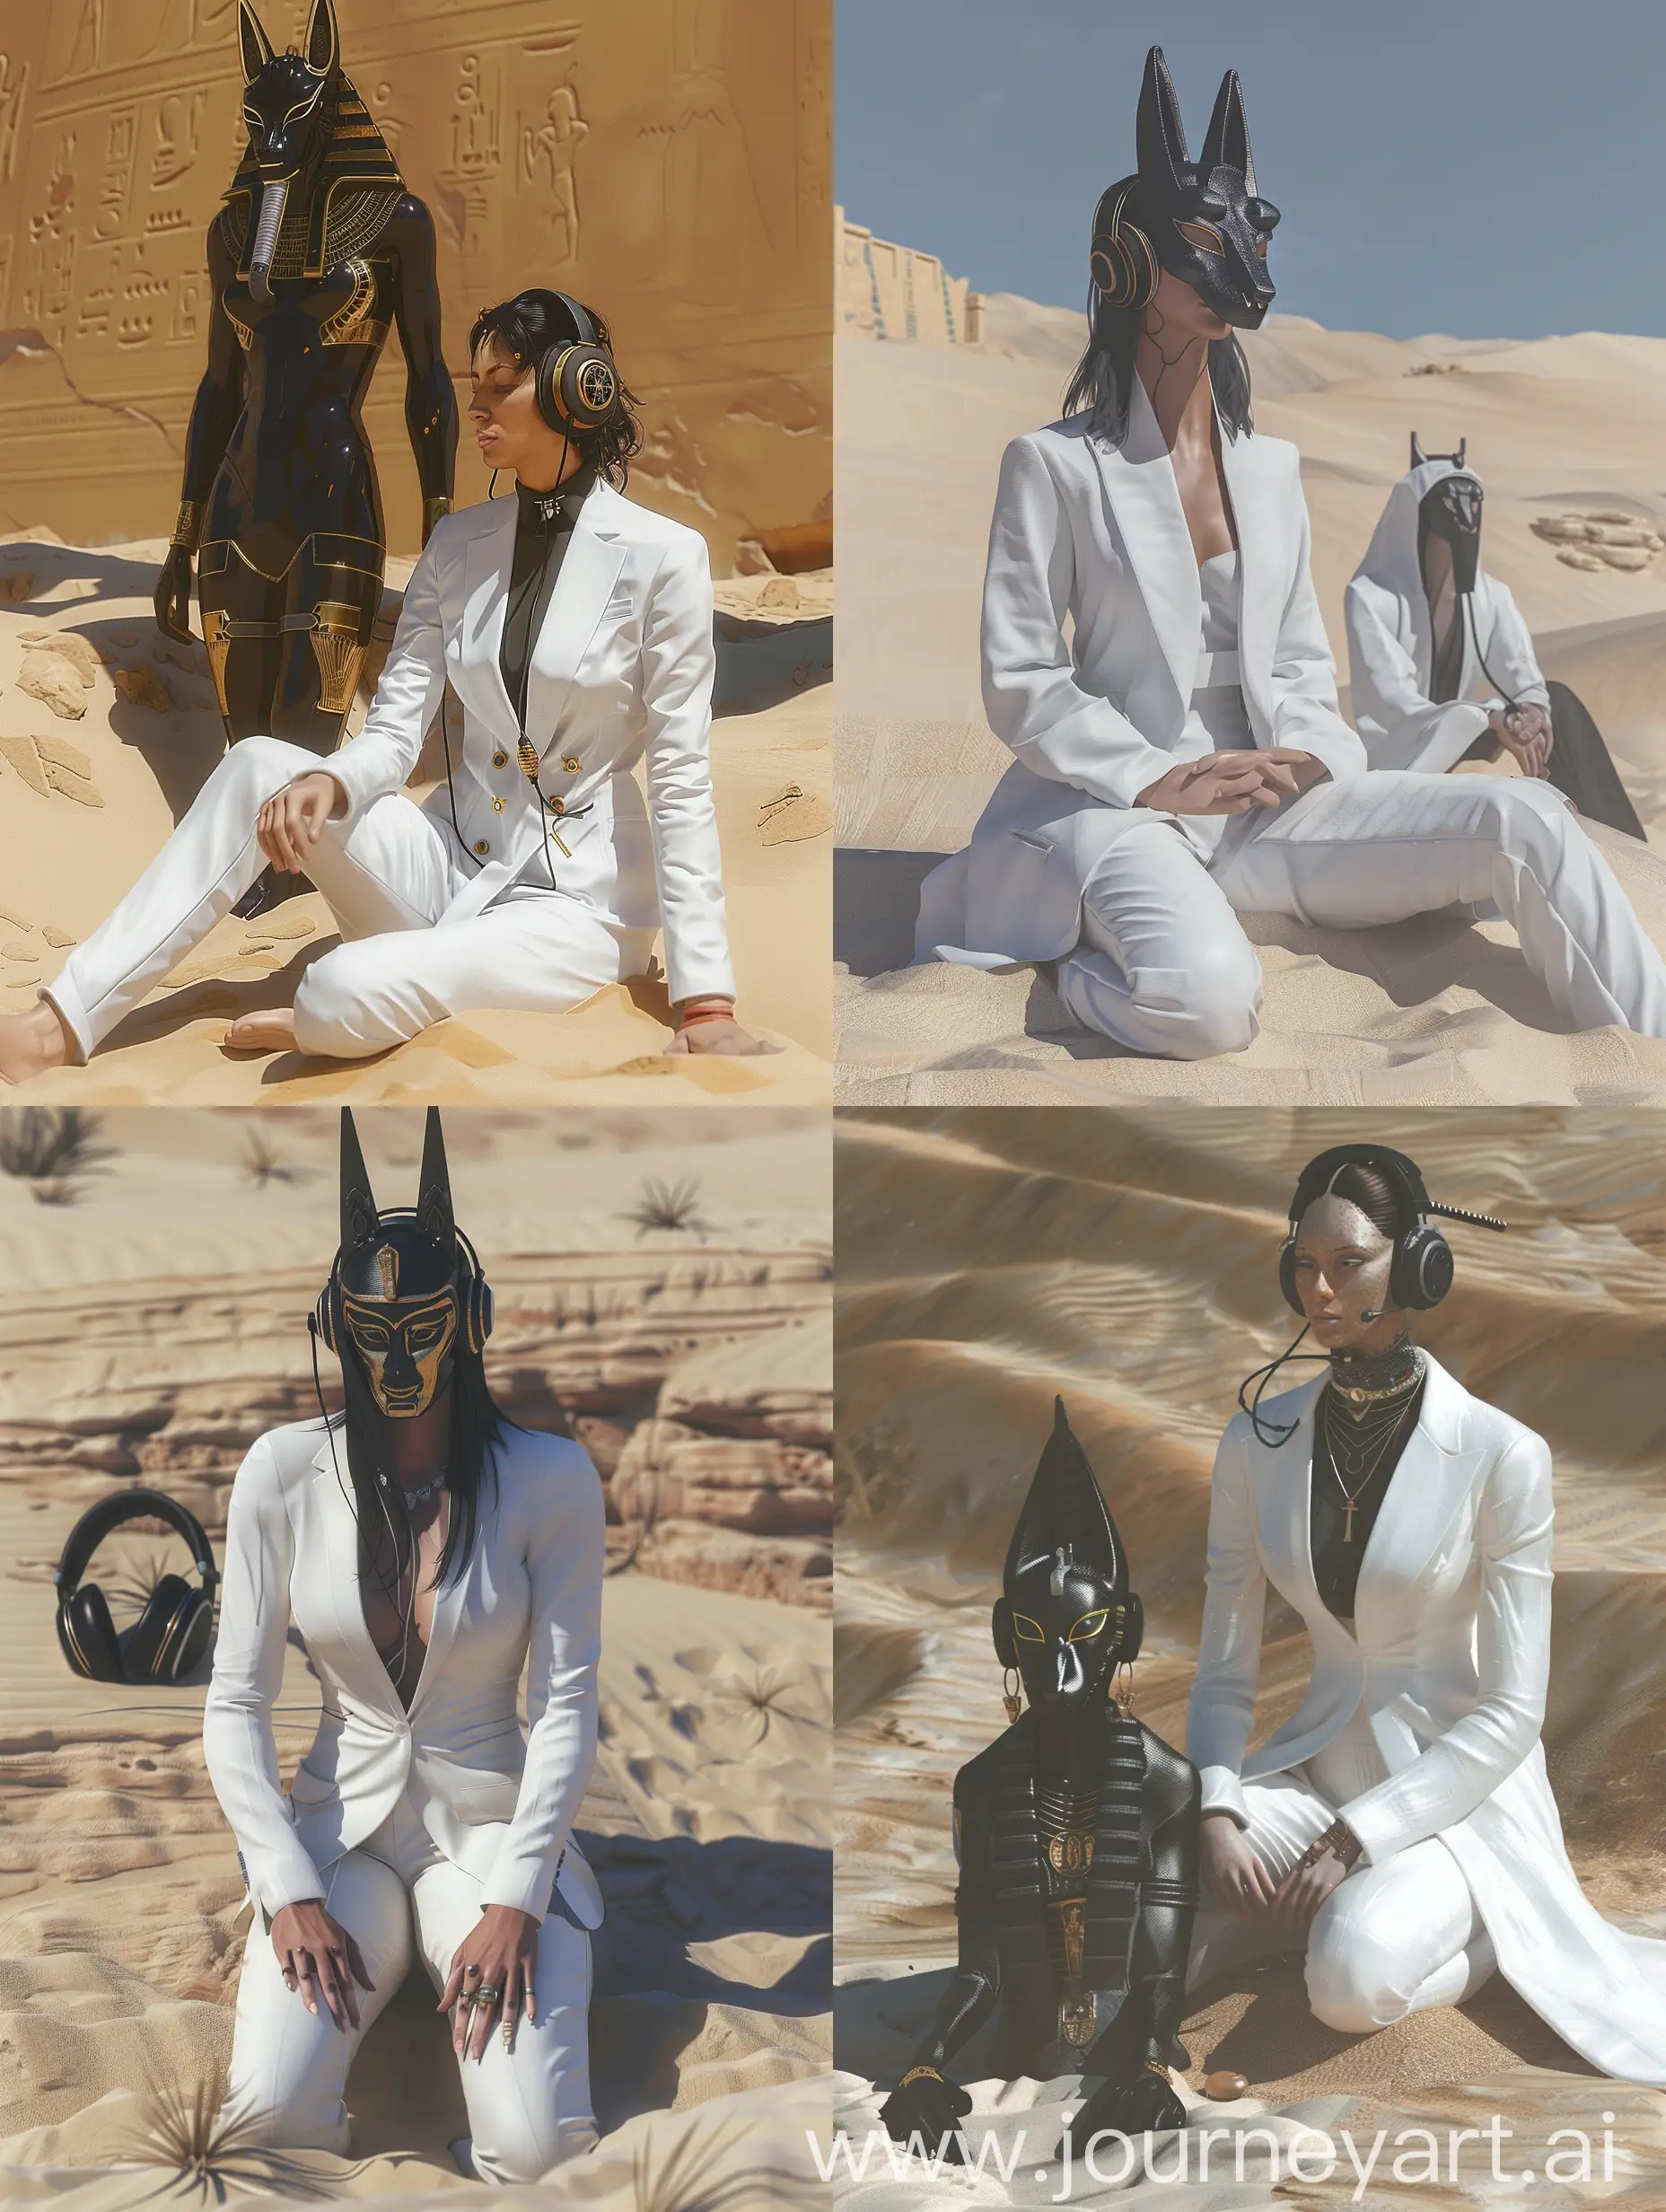 a woman in a white suit and Anubis mask, Nyarlathotep sitting on the sand with headphones, a hybrid mix of beeple styles, beeple daily art, beeple artwork, beeple and Jeremy Ketner, beeple art, artgem and beeple masterpiece, three-dimensional rendering of beeple